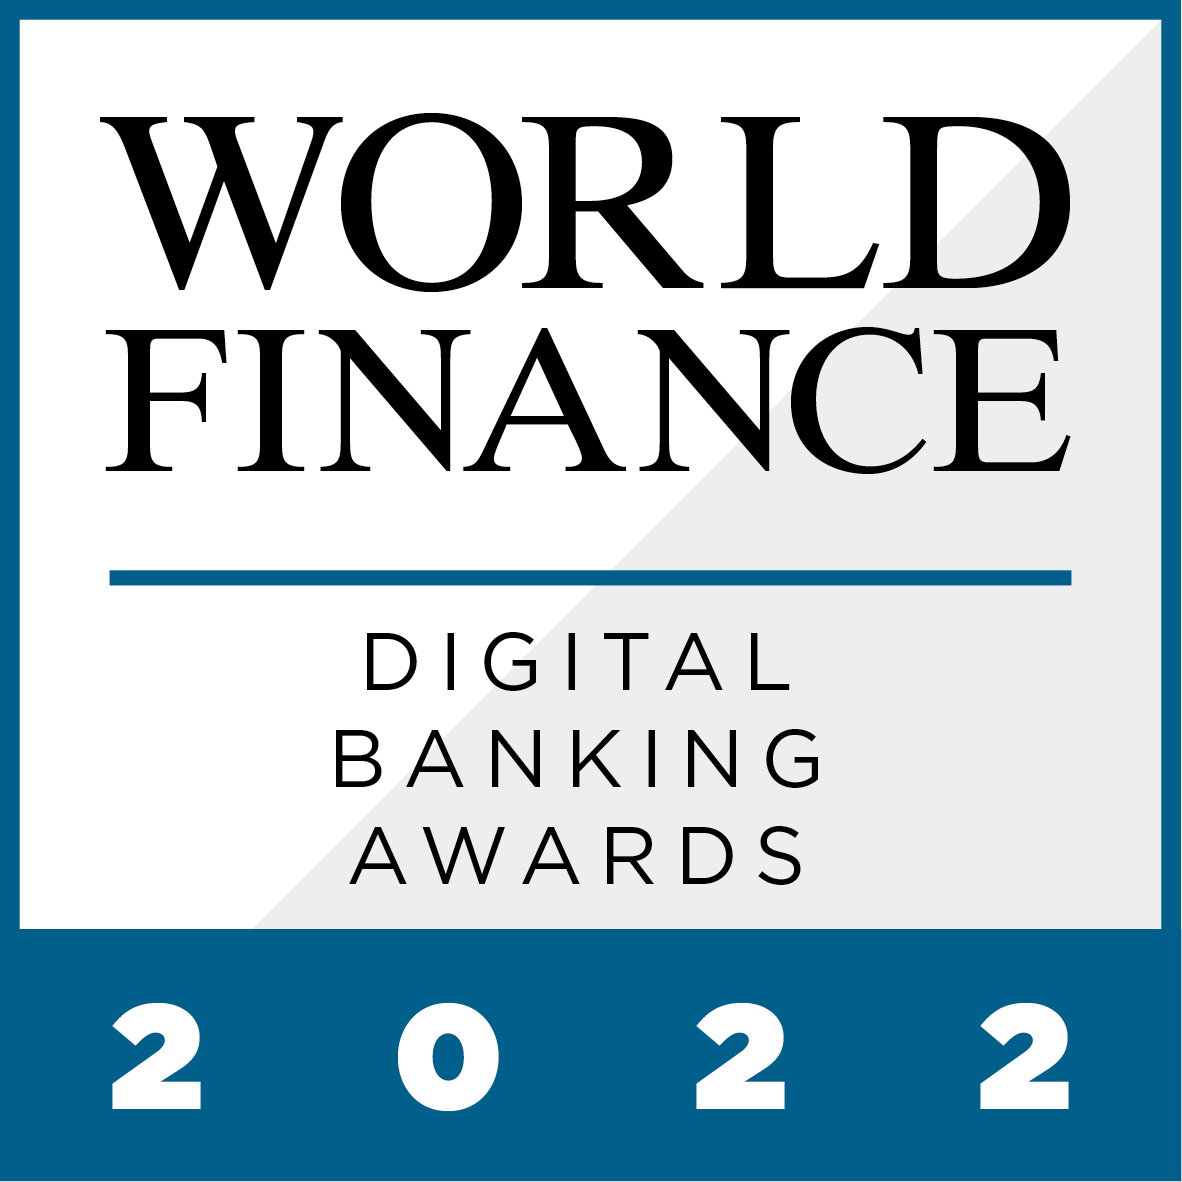 Please see below the full list of the Digital Banking Awards 2022, as awarded by World Finance magazine